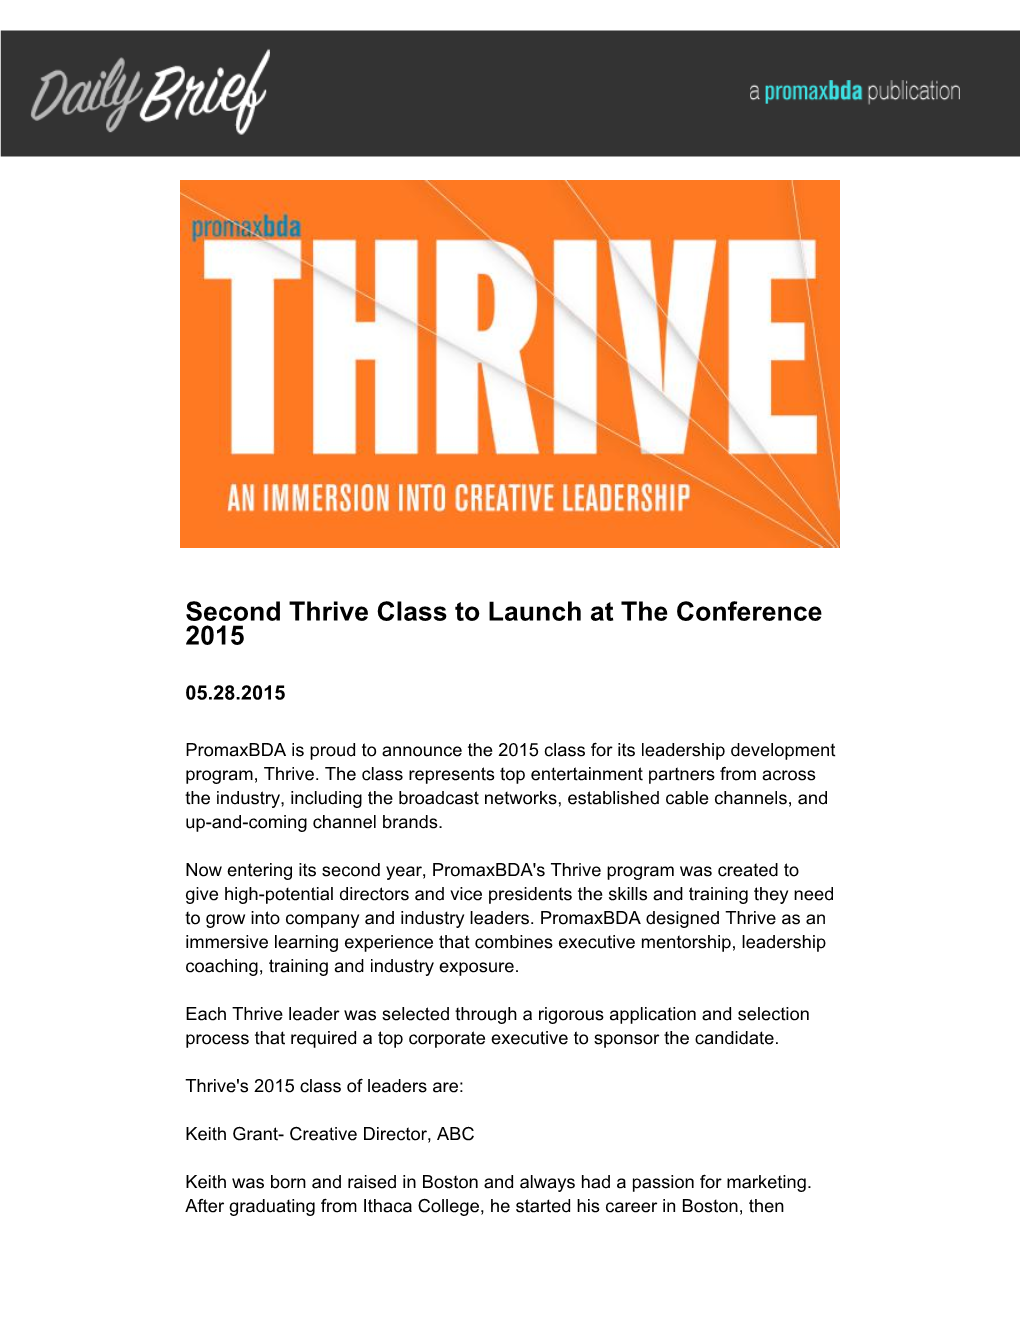 Second Thrive Class to Launch at the Conference 2015